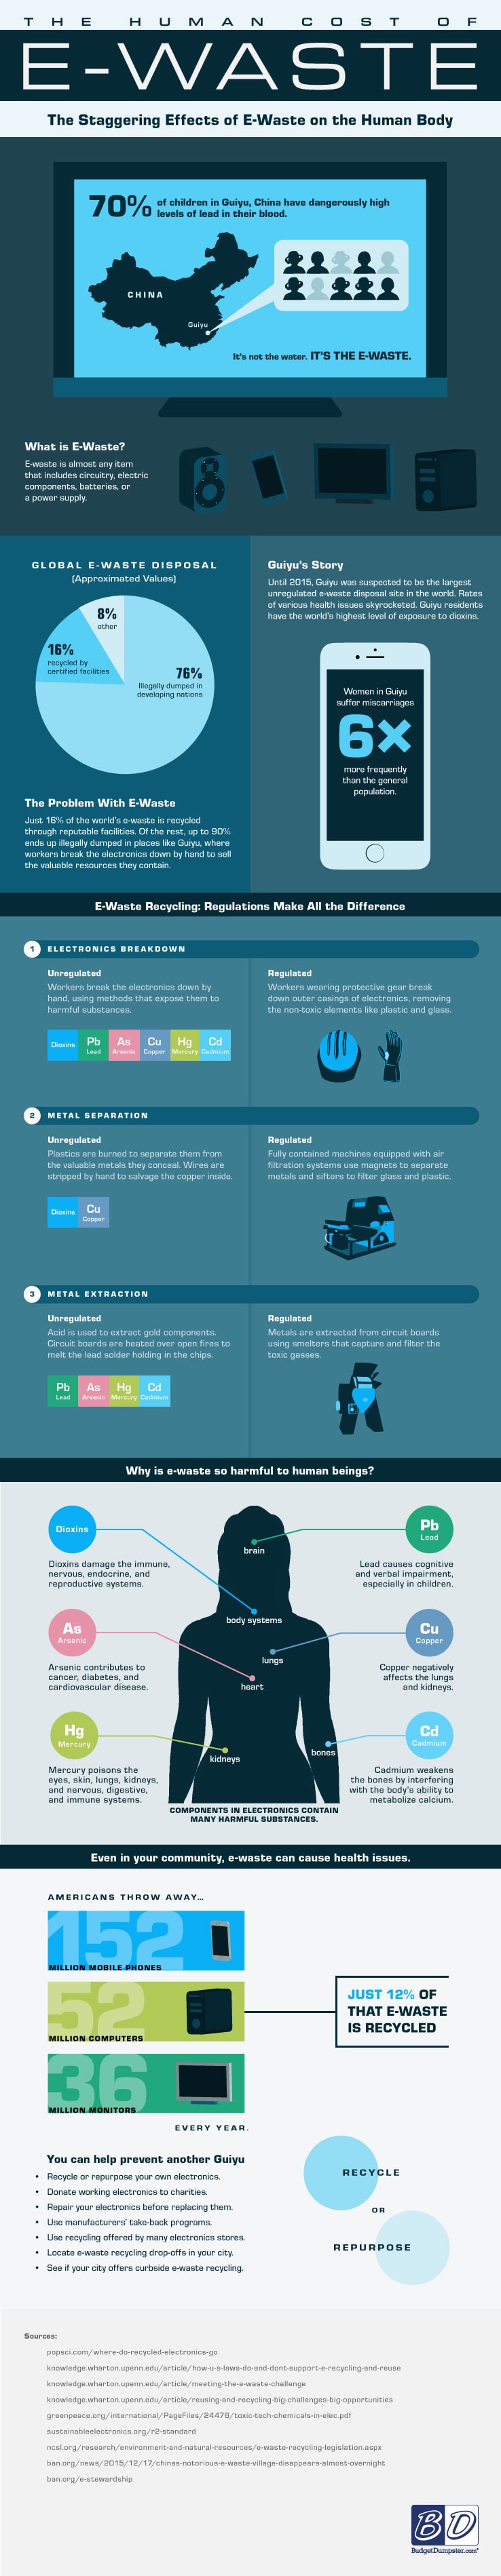 Infographic Detailing the Effects of E-Waste on the Human Body